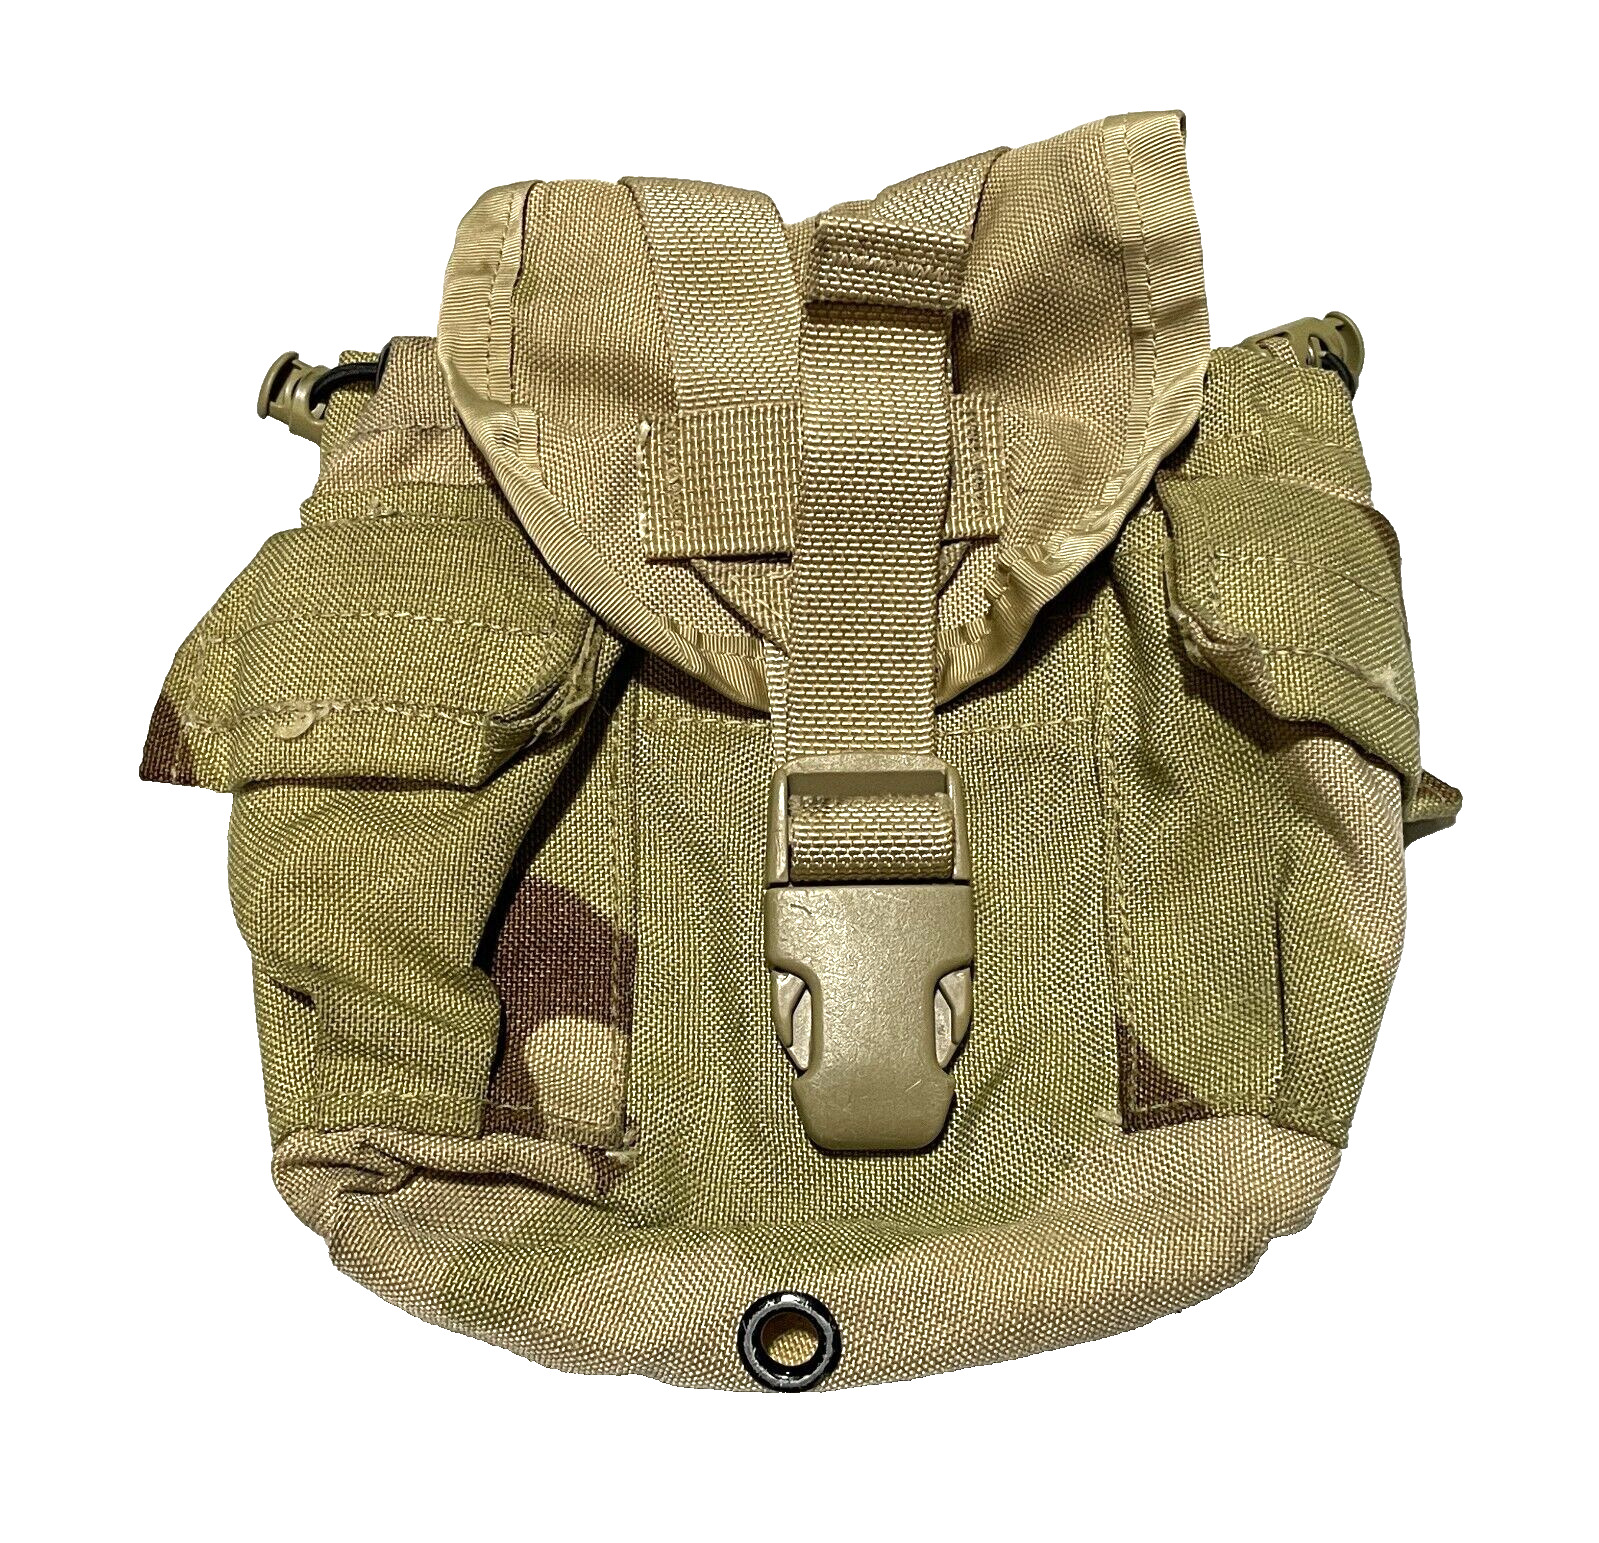 USGI Military MOLLE 1 QT CANTEEN COVER Carrier Utility Pouch 3-Color Desert VGC